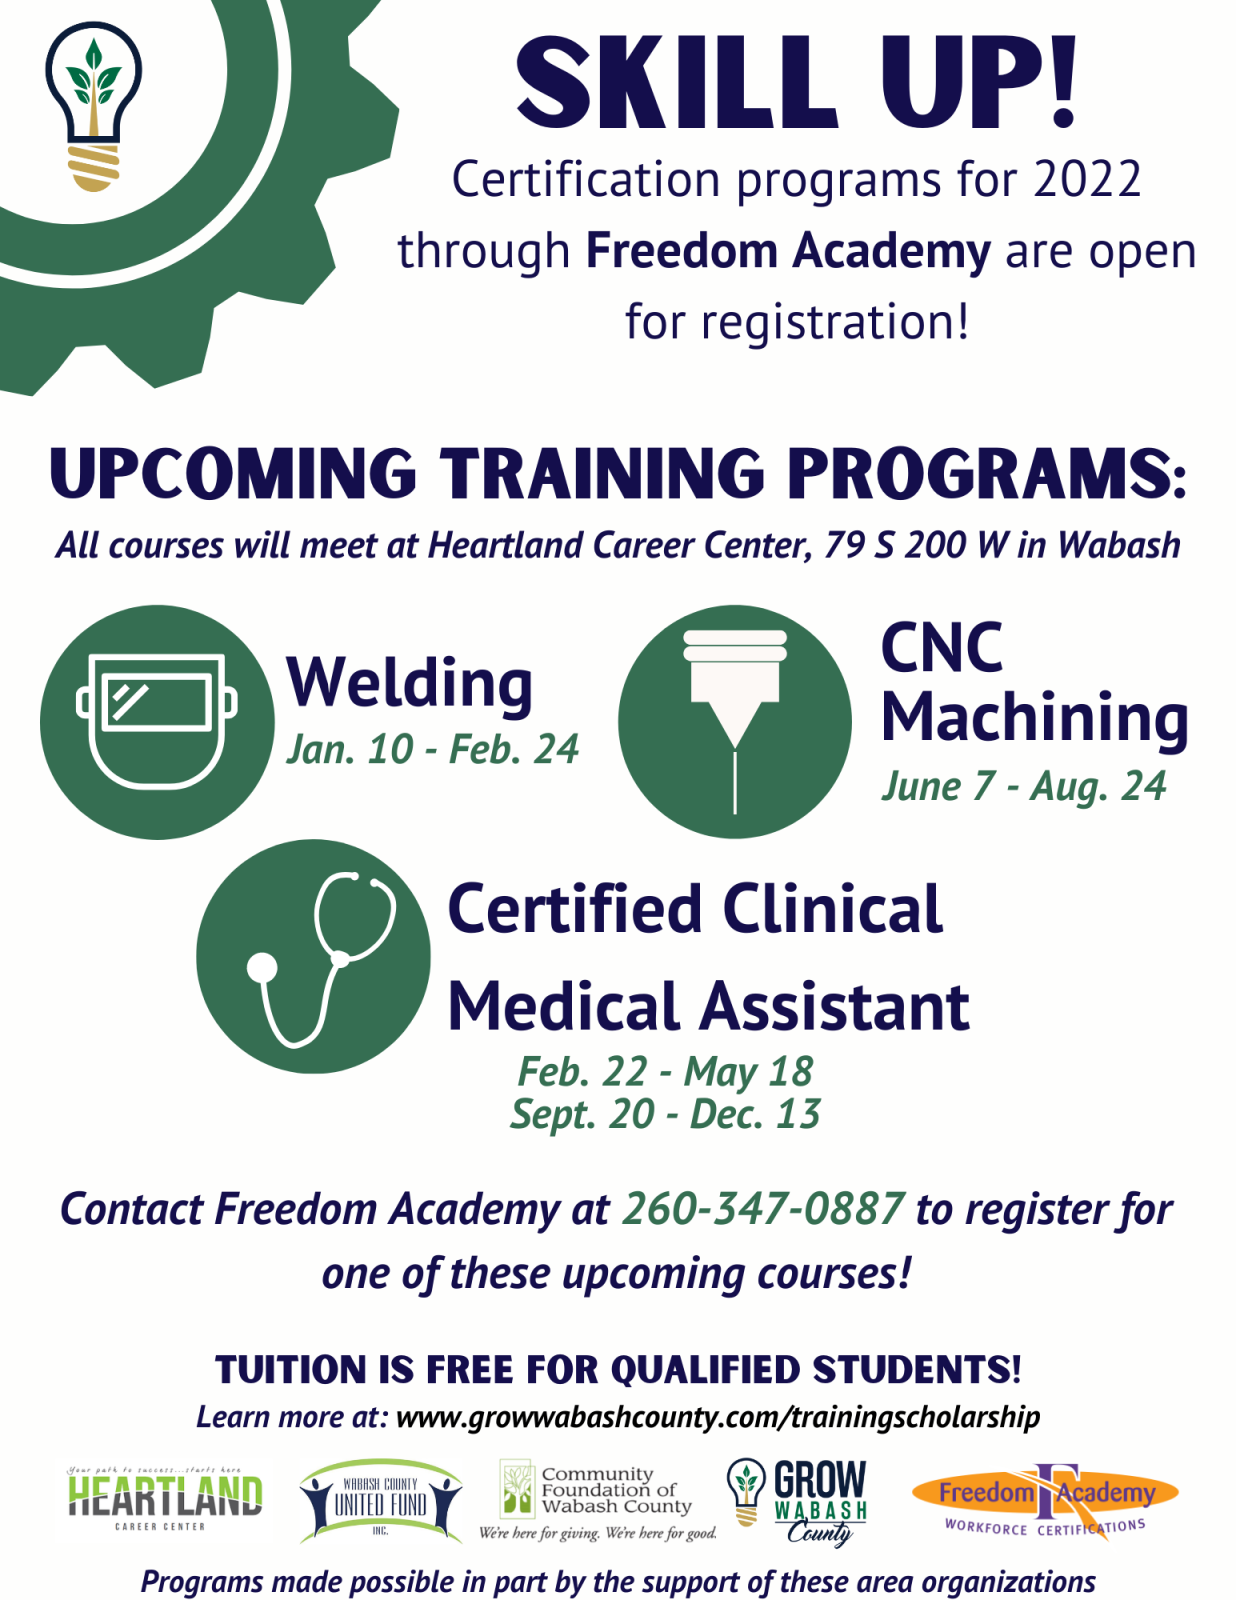 Freedom Academy announces 2022 slate of certification programs Photo